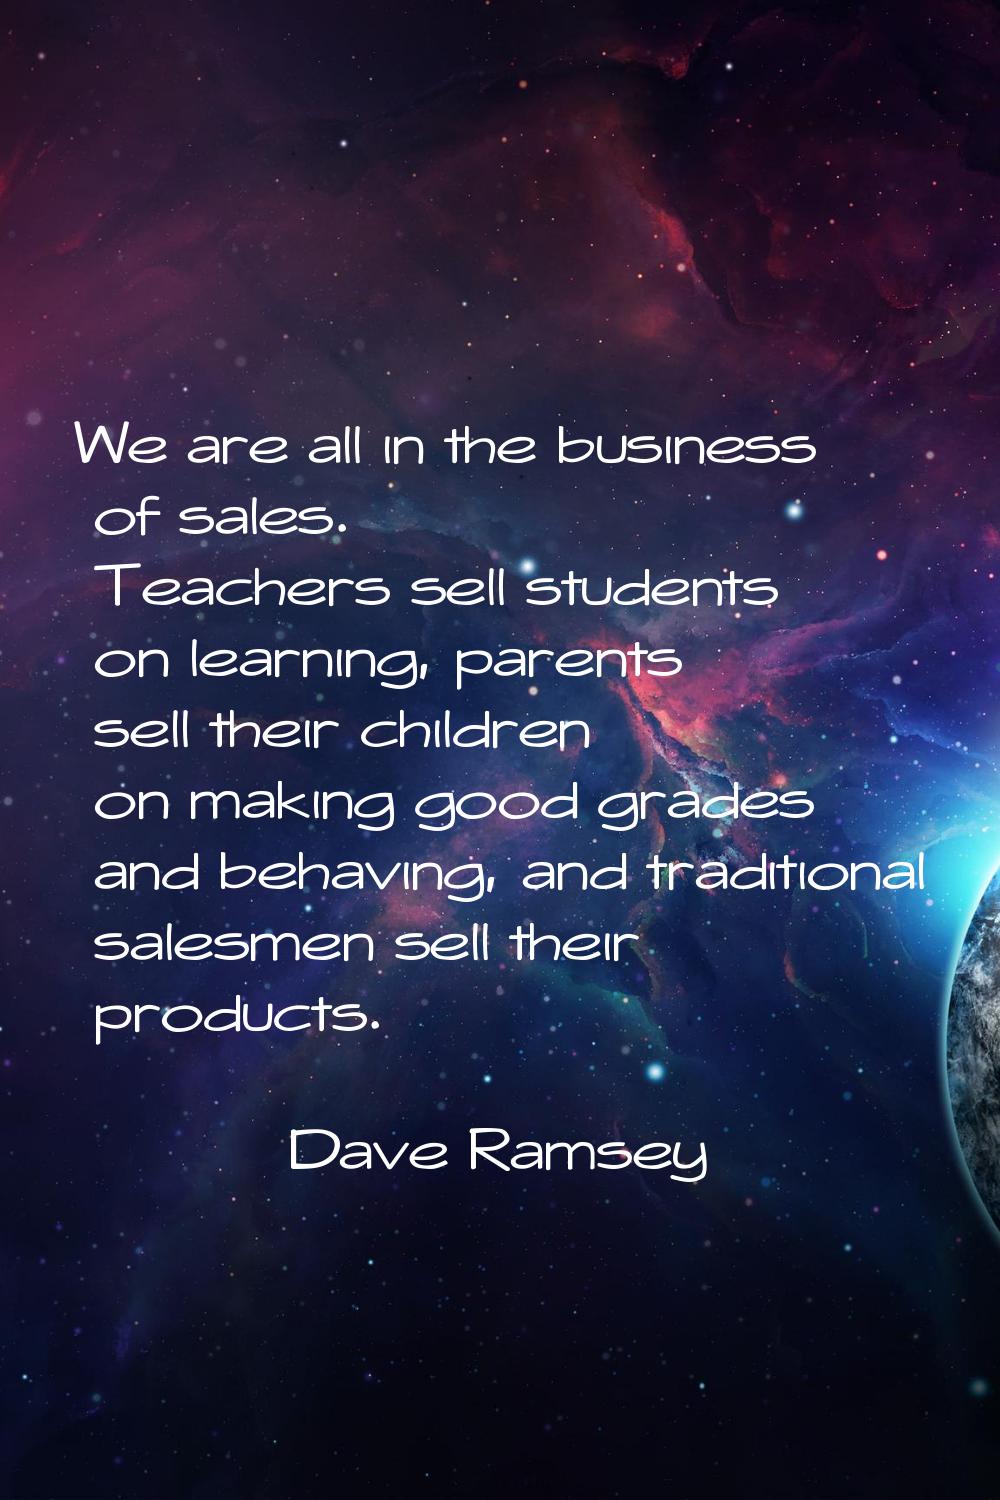 We are all in the business of sales. Teachers sell students on learning, parents sell their childre